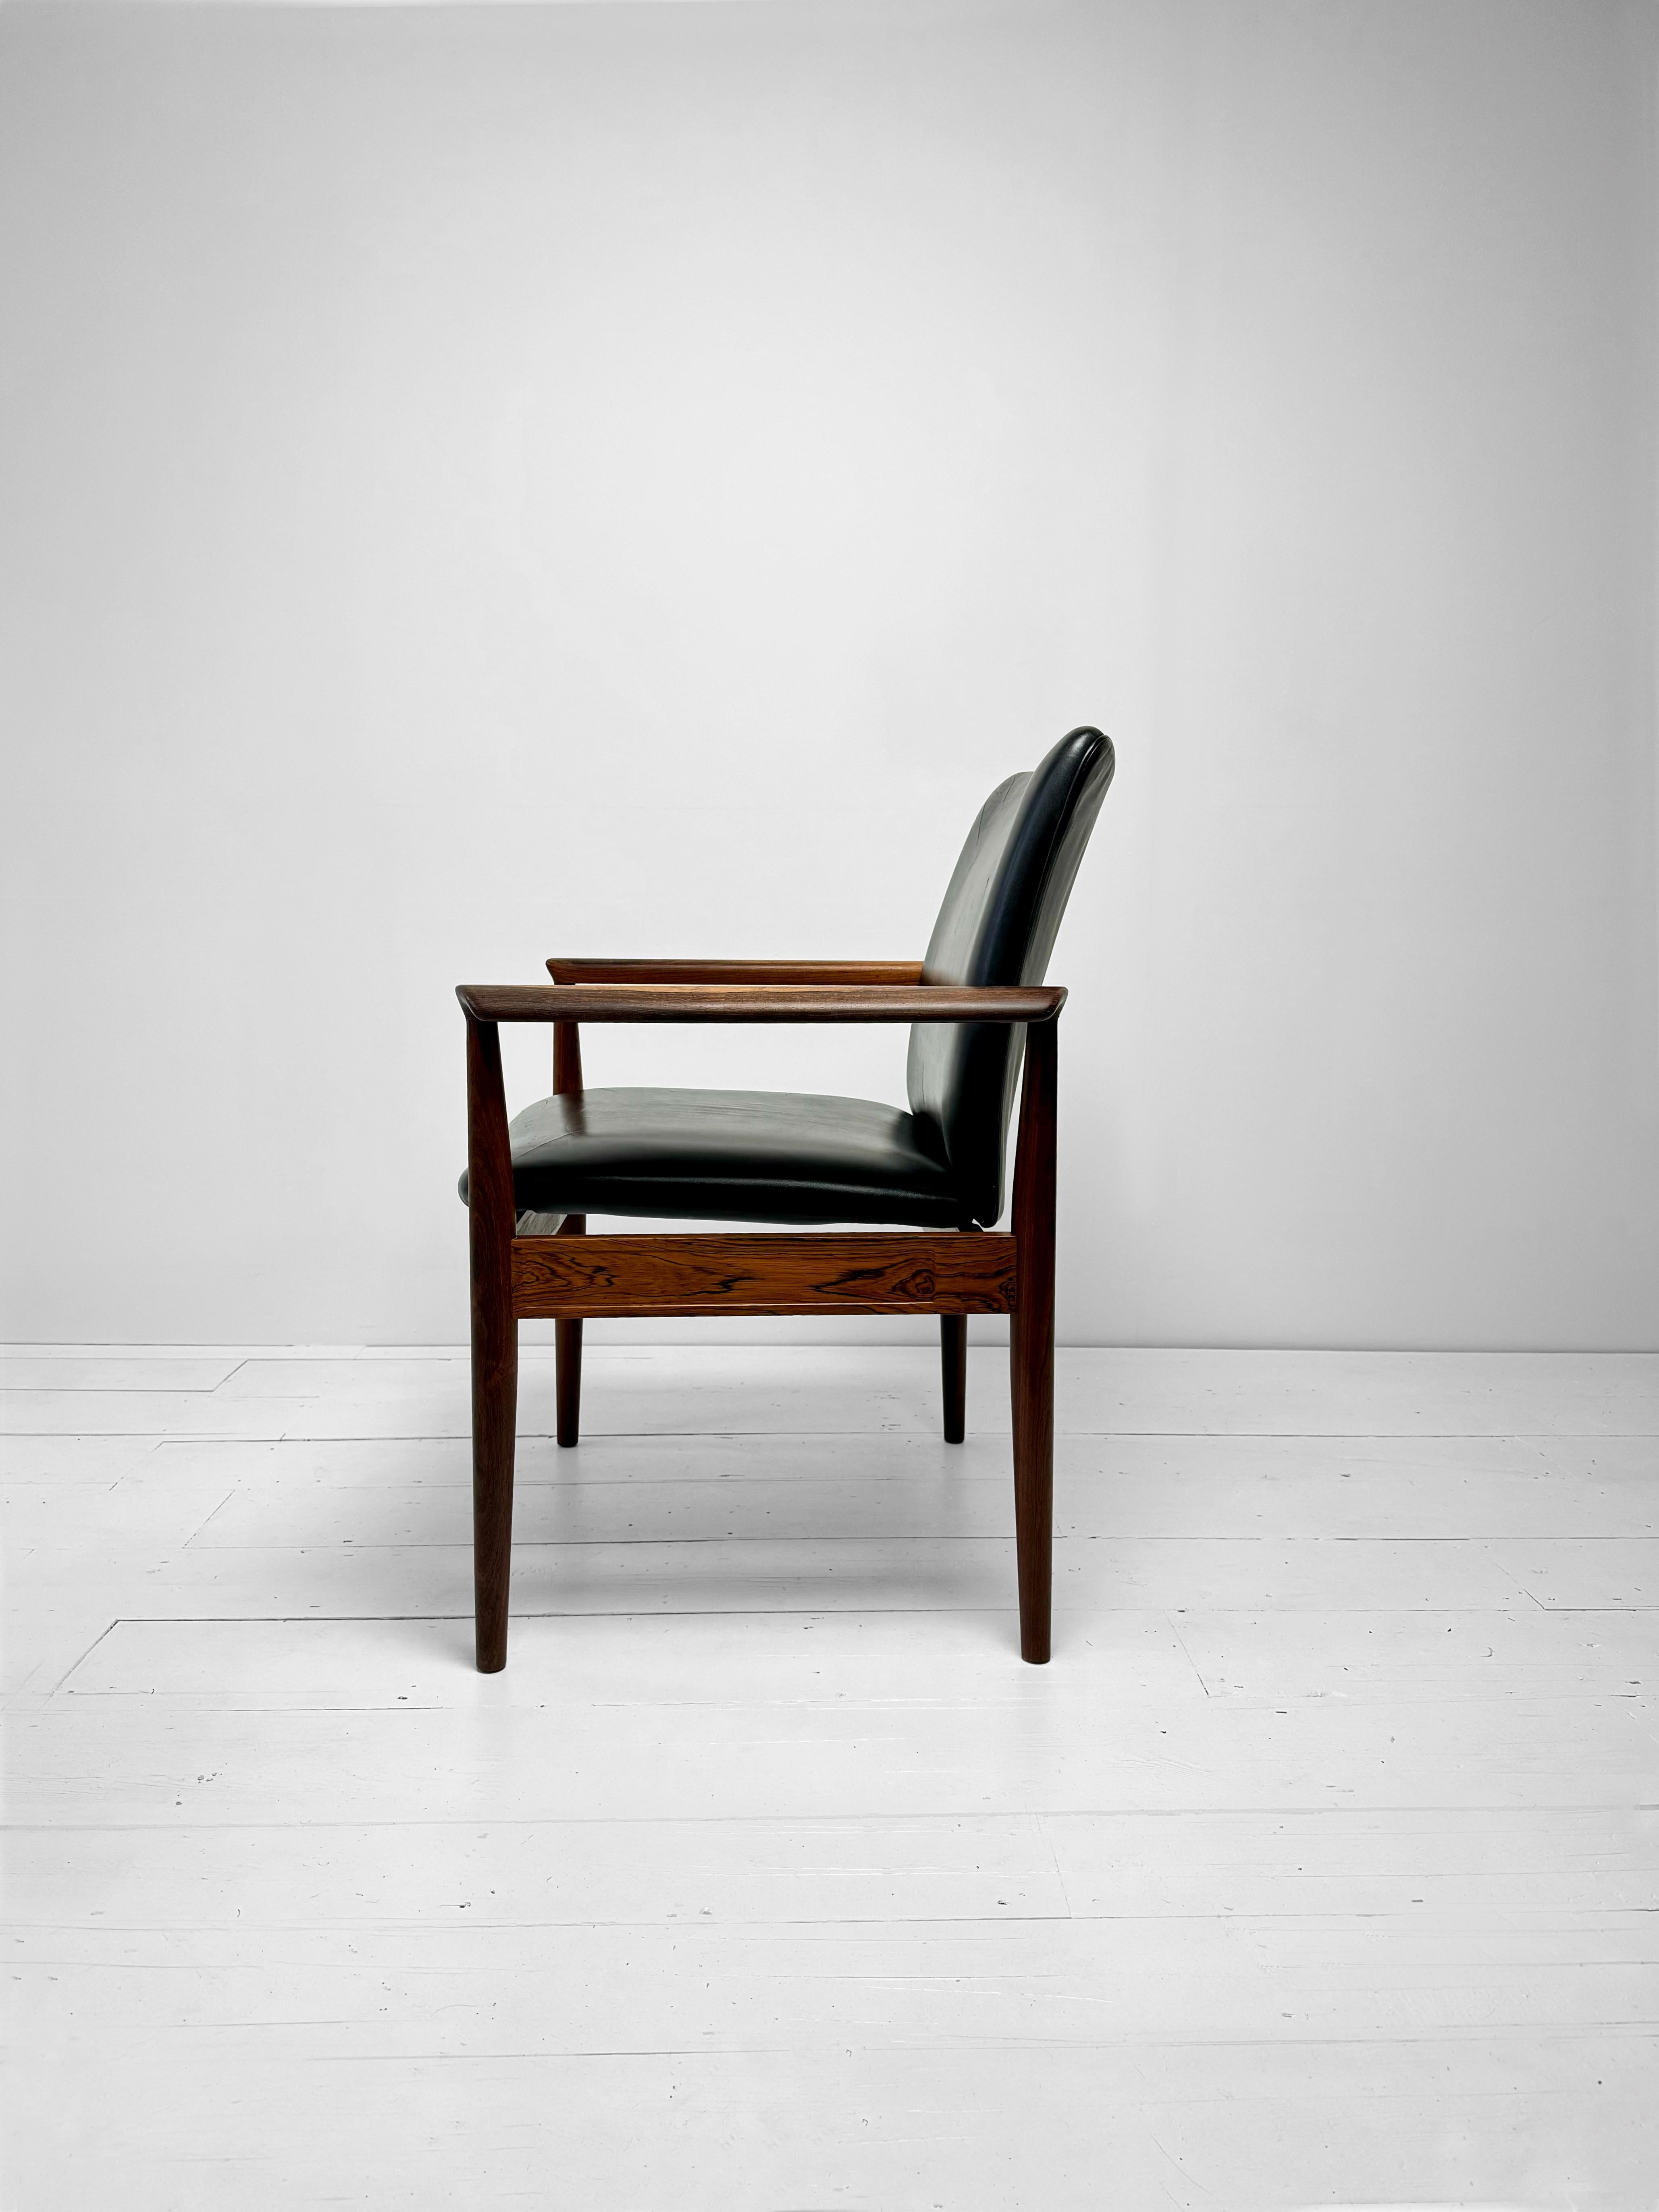 Mid-20th Century Set of Diplomat Armchairs in Rosewood and Leather by Finn Juhl, Denmark c.1960's For Sale